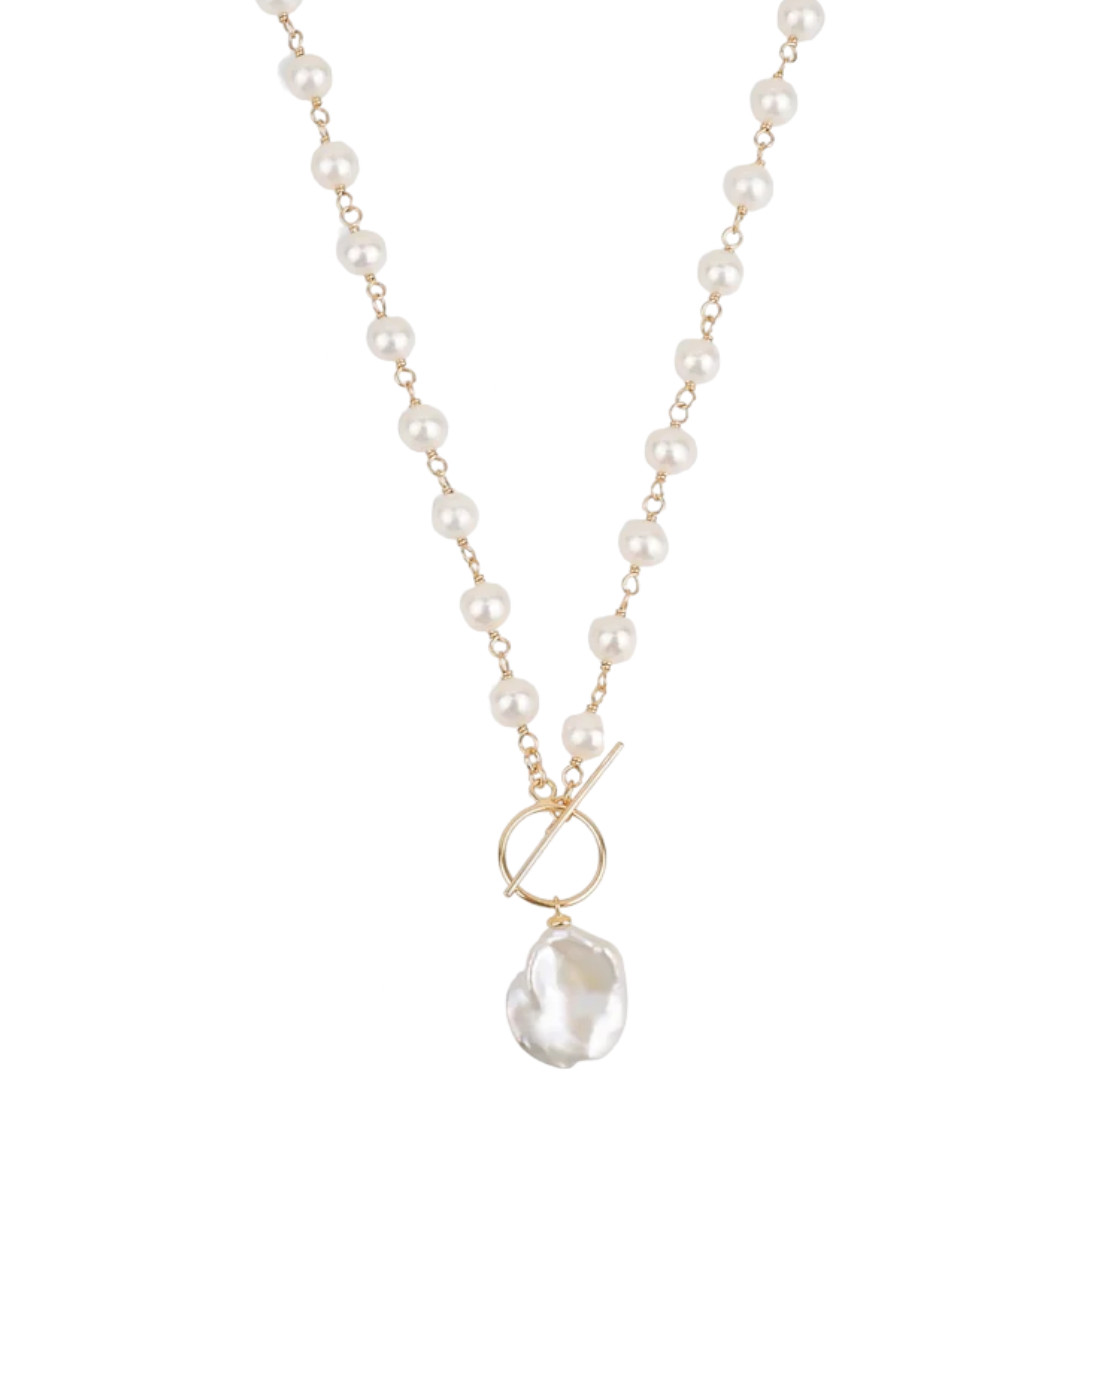 The Knotting Keshi Pearl Necklace